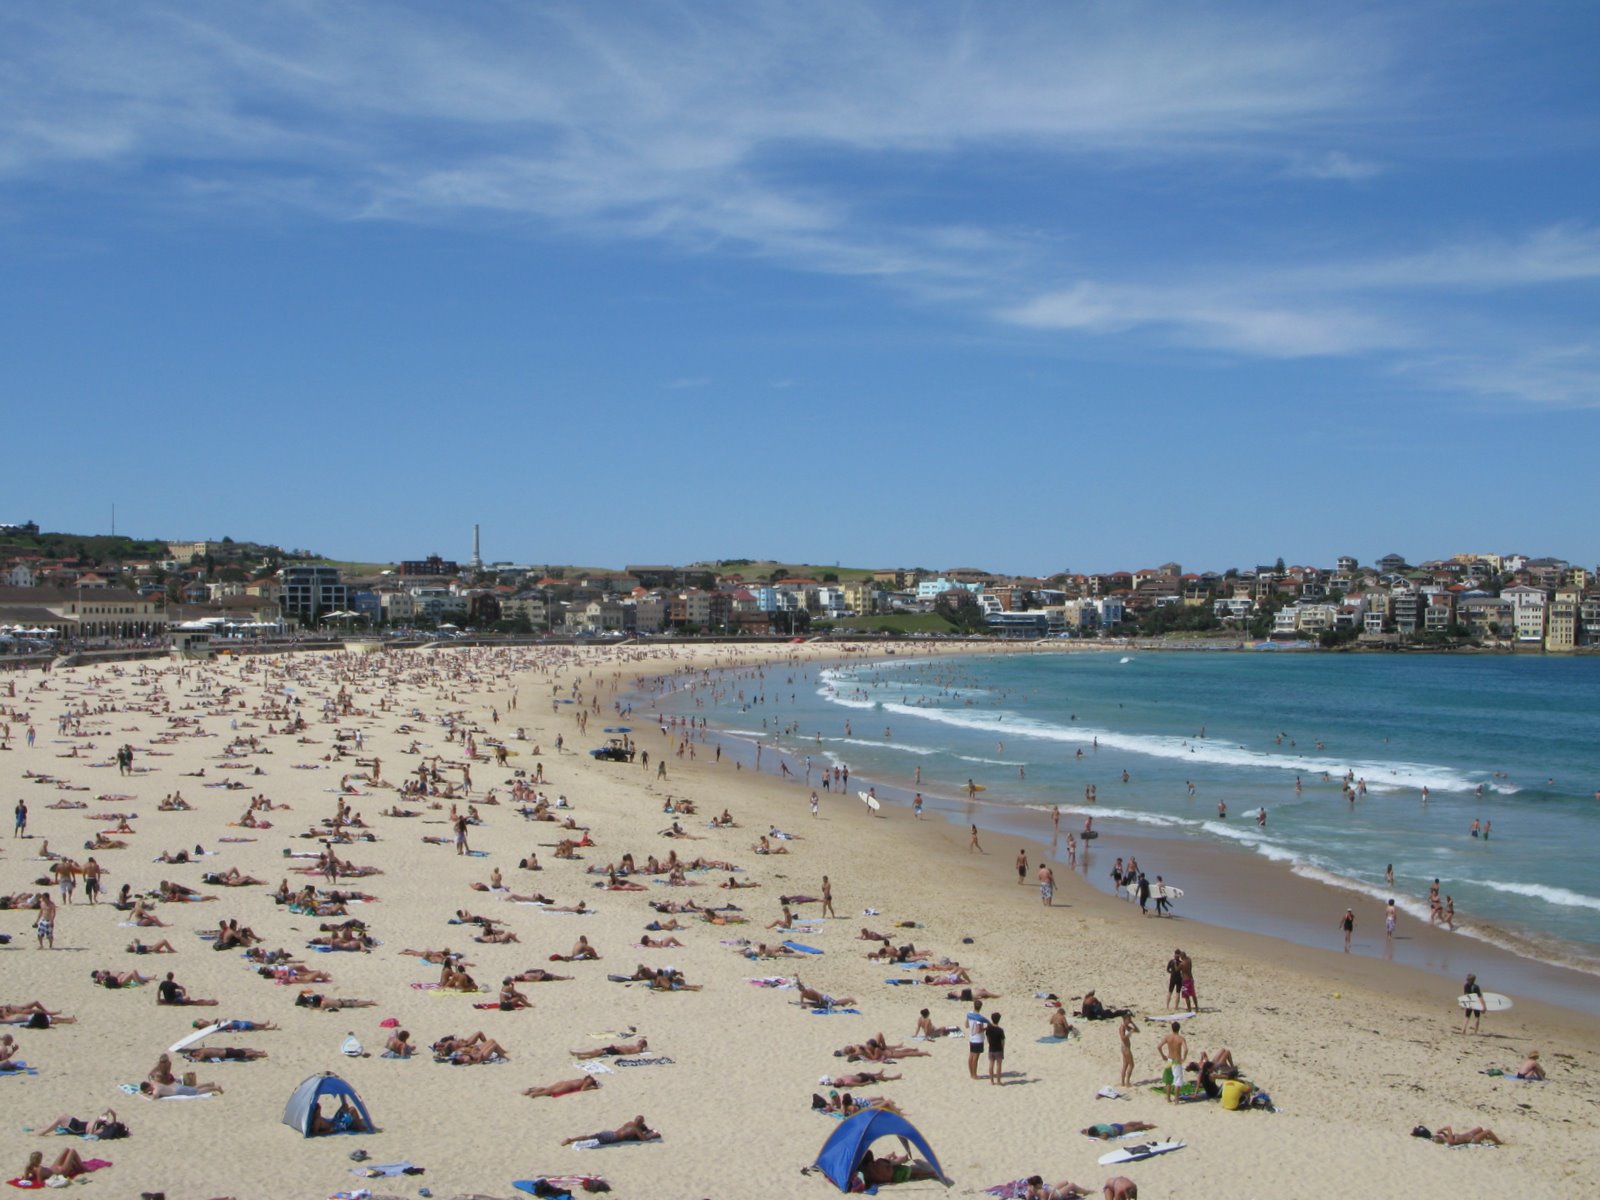 Reminder of a Good Day: Summer days (Ferries and Bondi Beach)